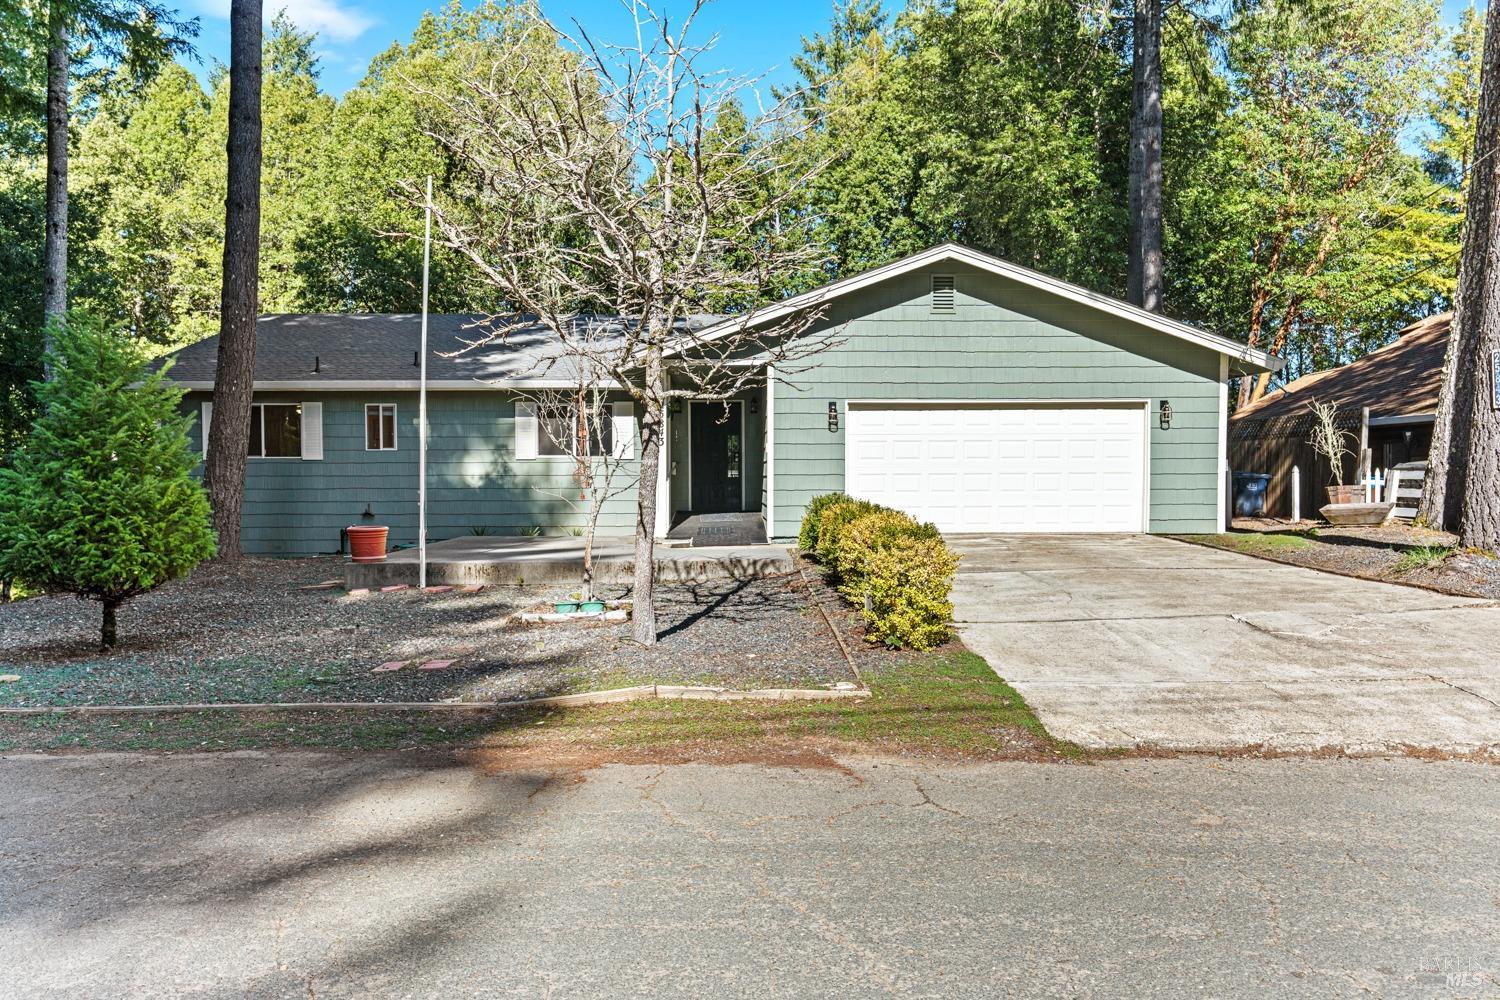 Photo of 25843 Bear Ln in Willits, CA